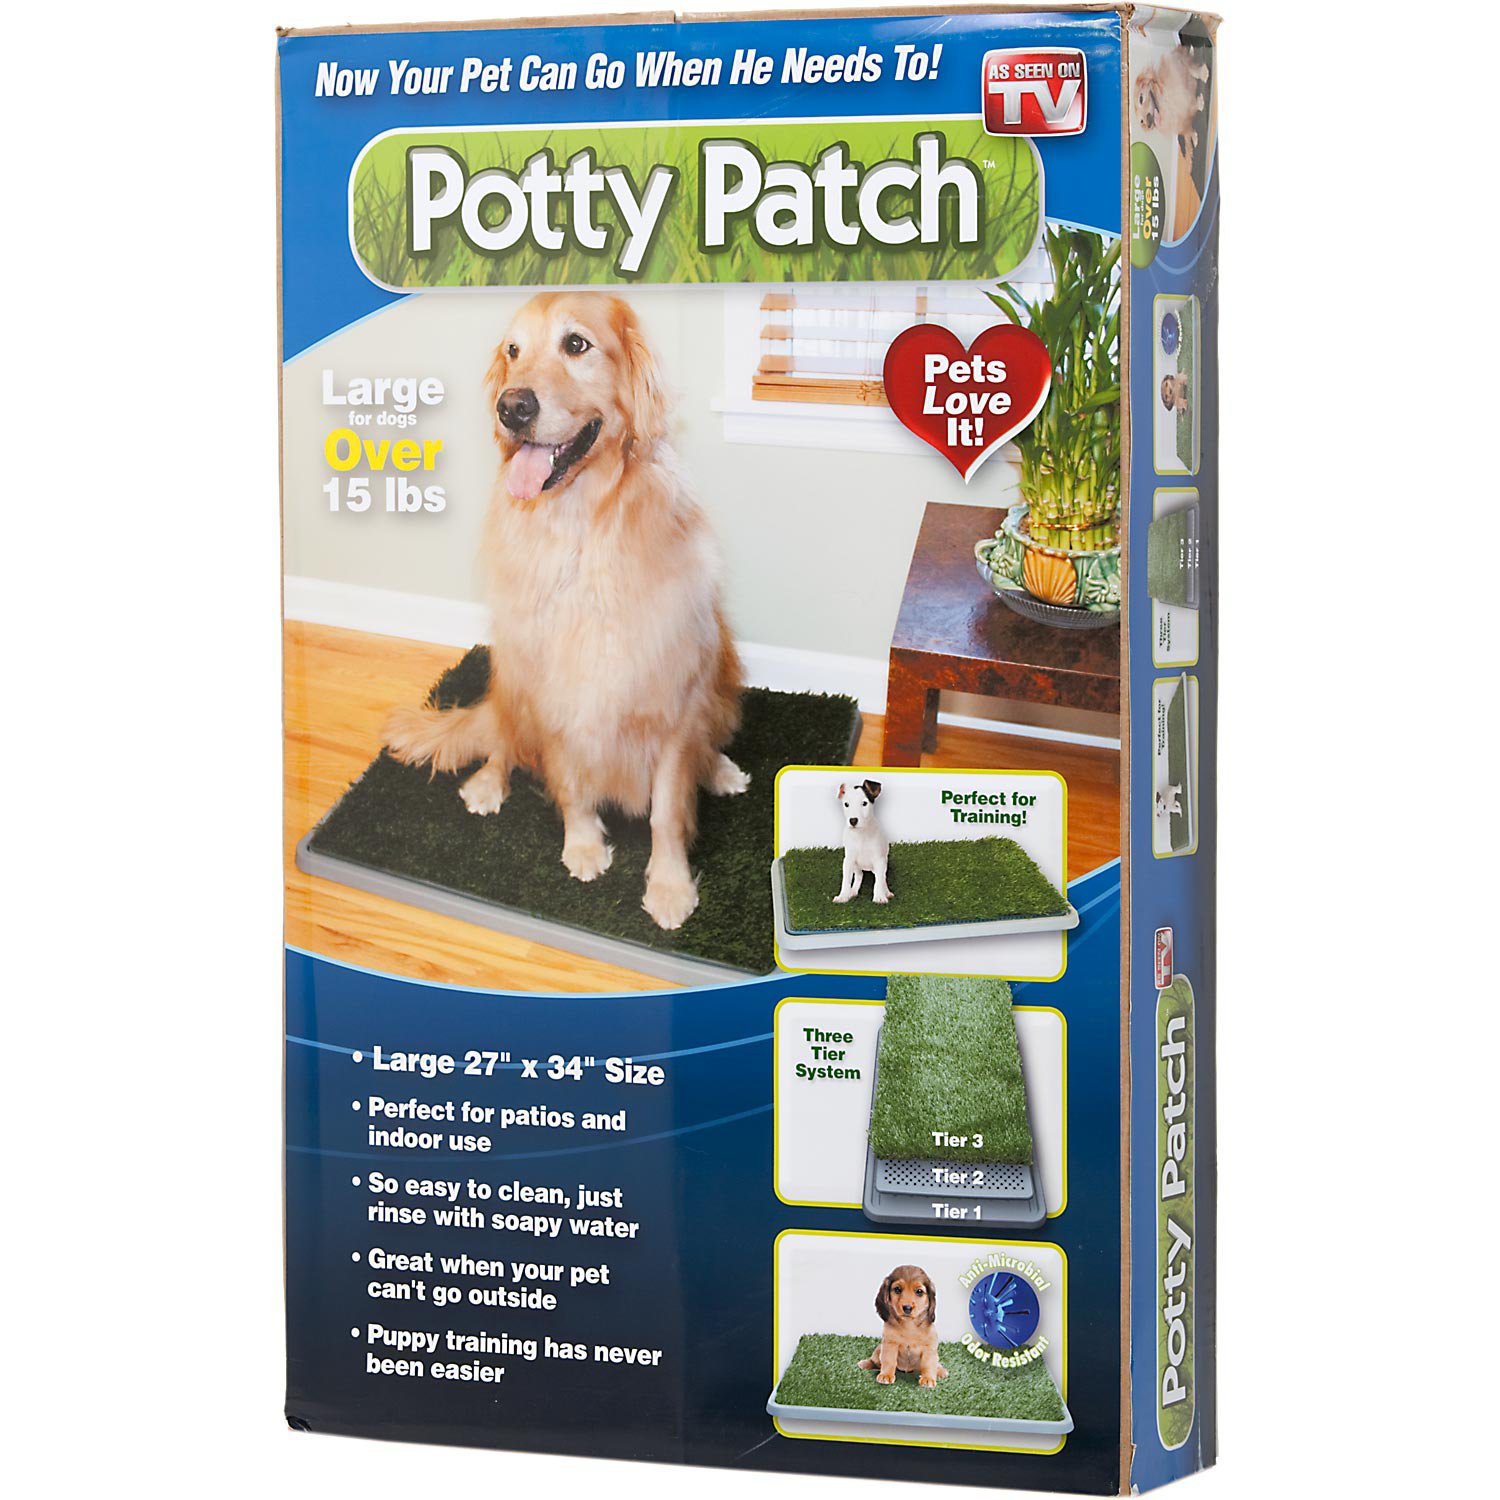 Potty Patch As Seen on TV